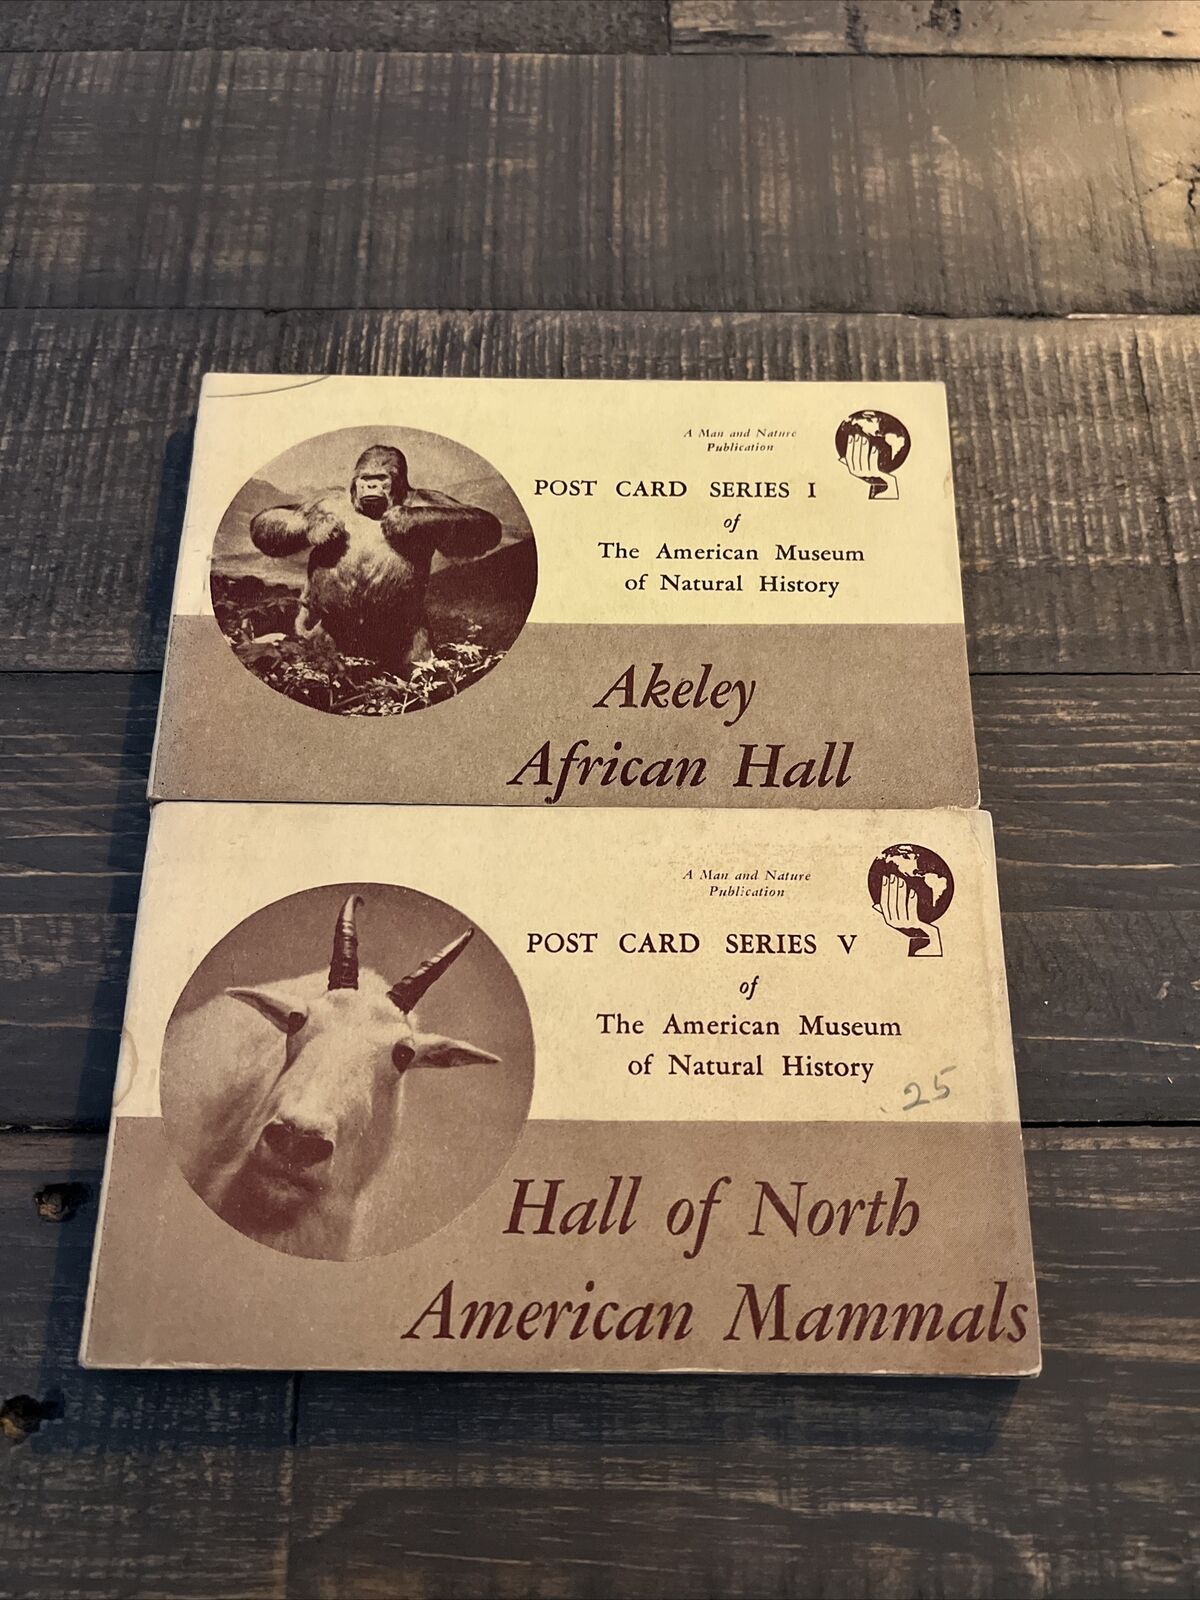 Post Card Books ︱Set of 2 Books ︱ The American Museum of Natural History ︱NY